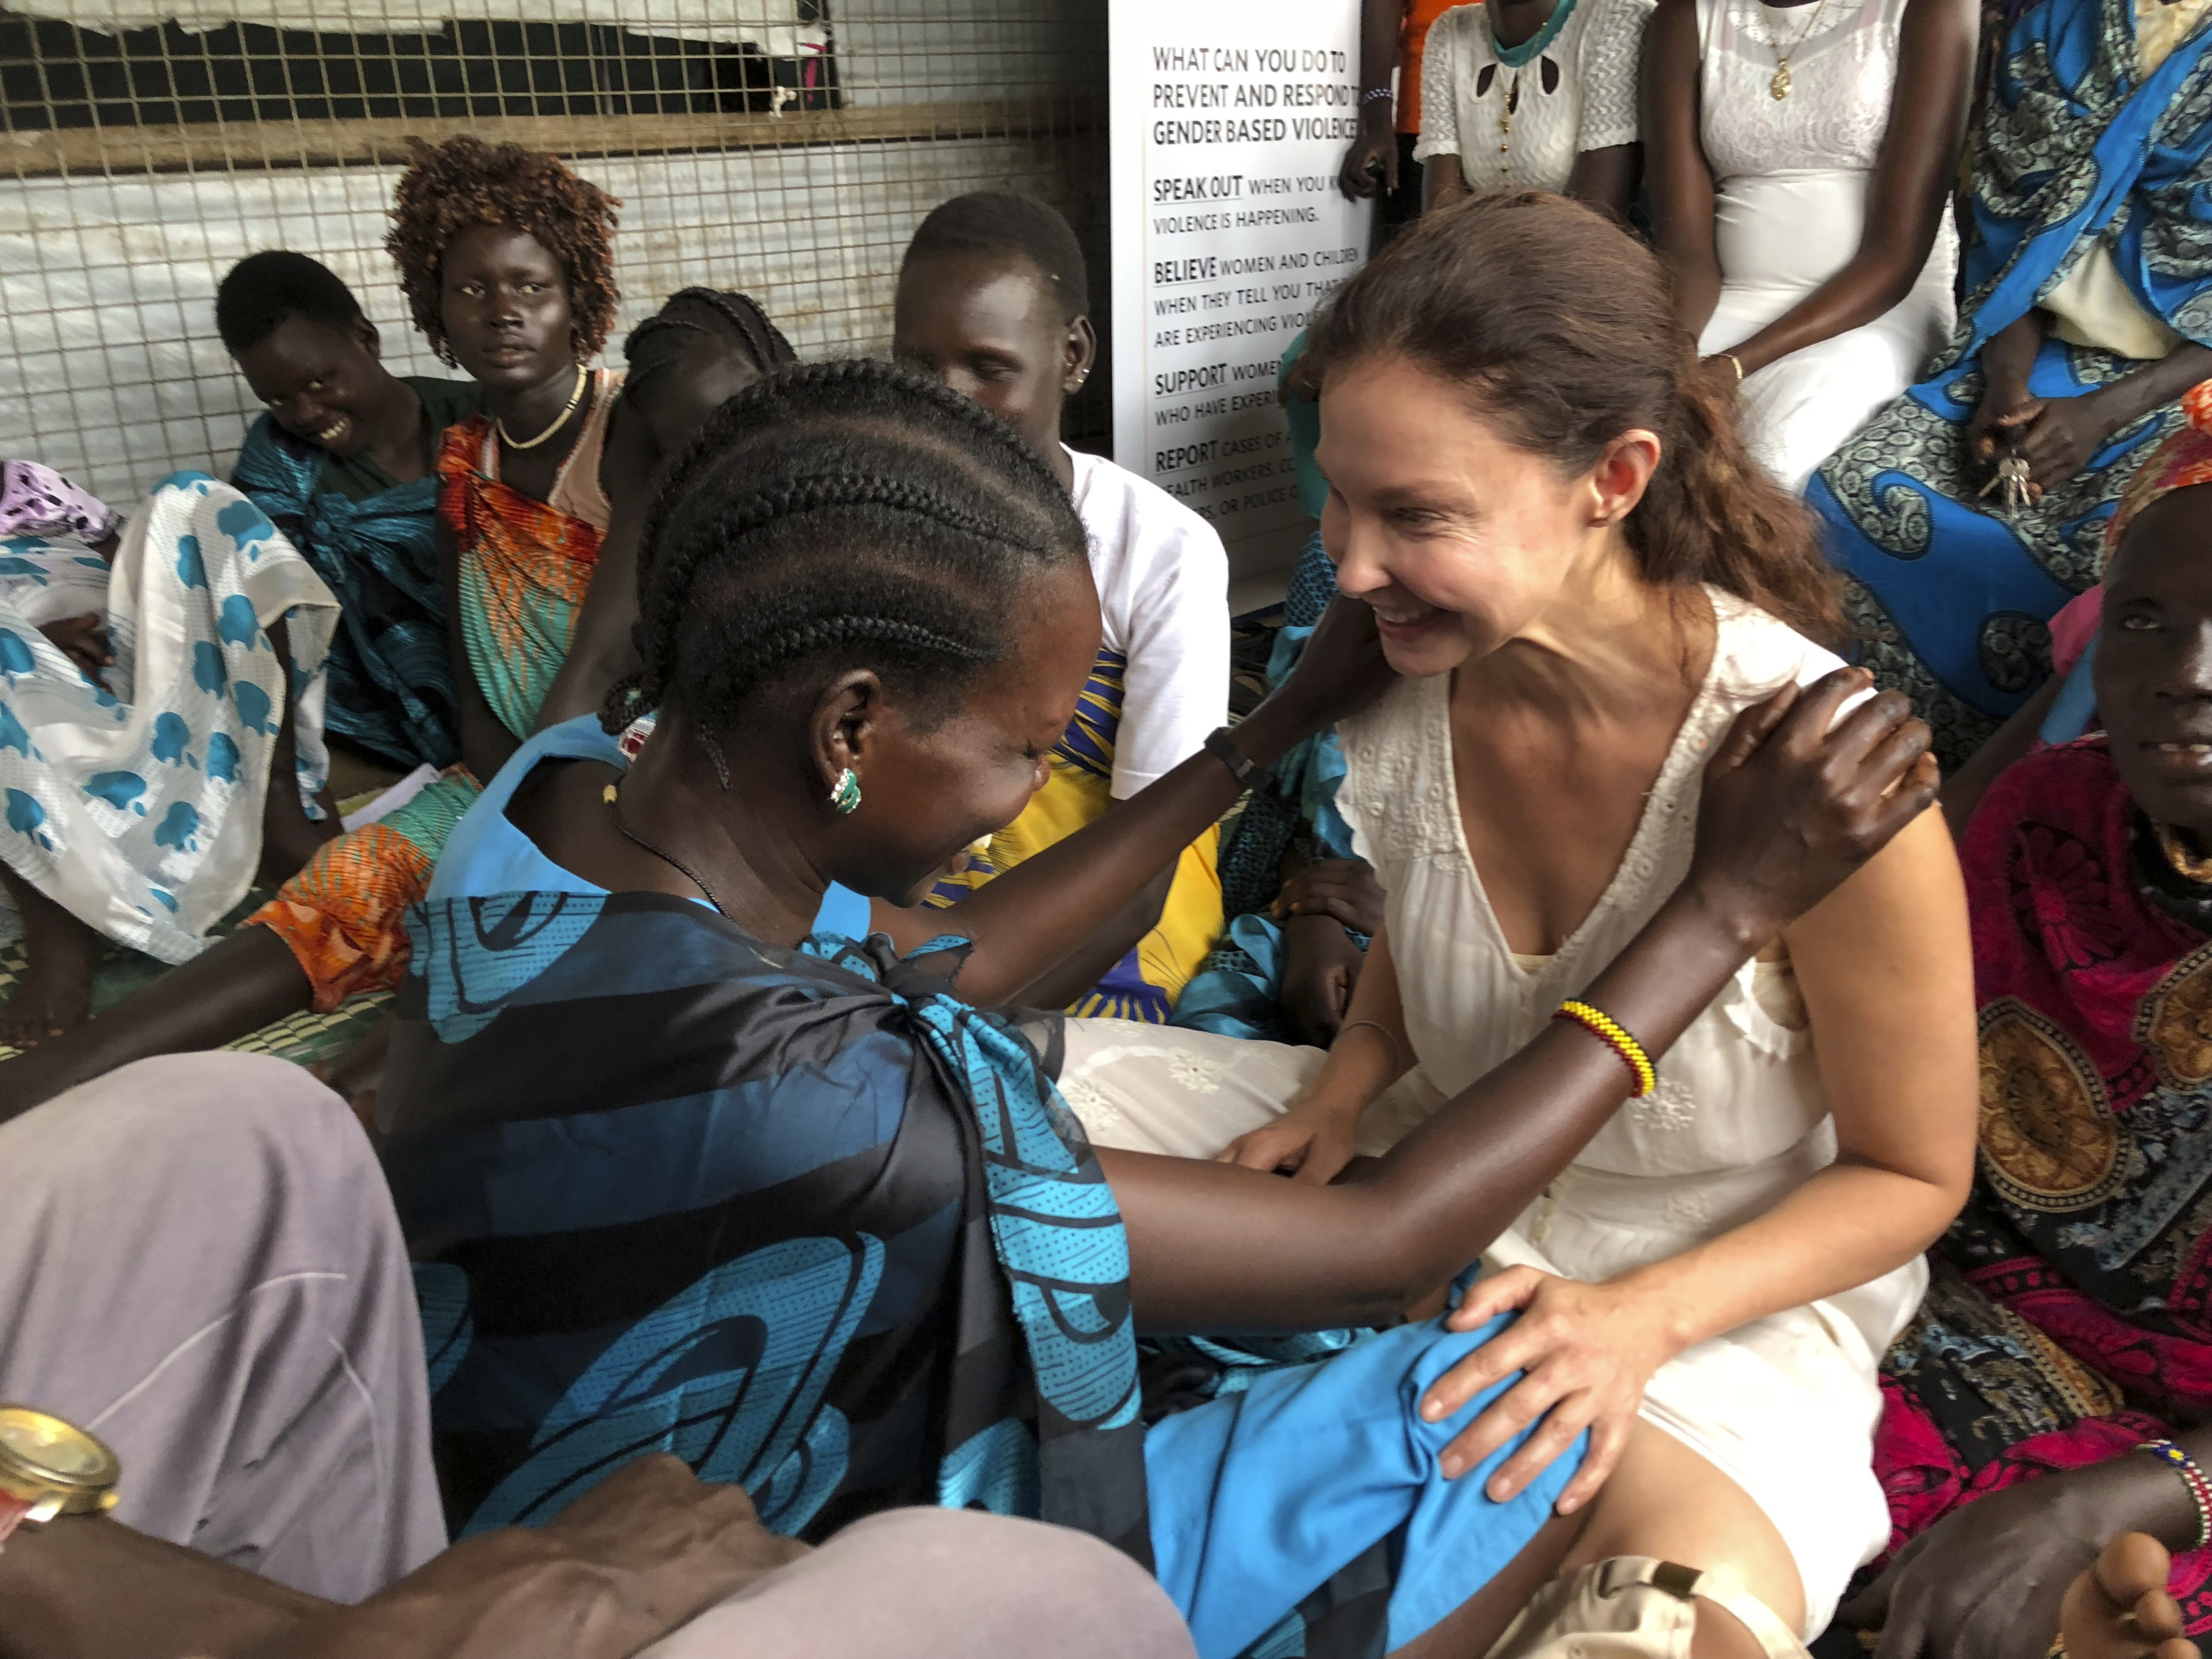 Actress Ashley Judd meets refugees in Juba, South Sudan